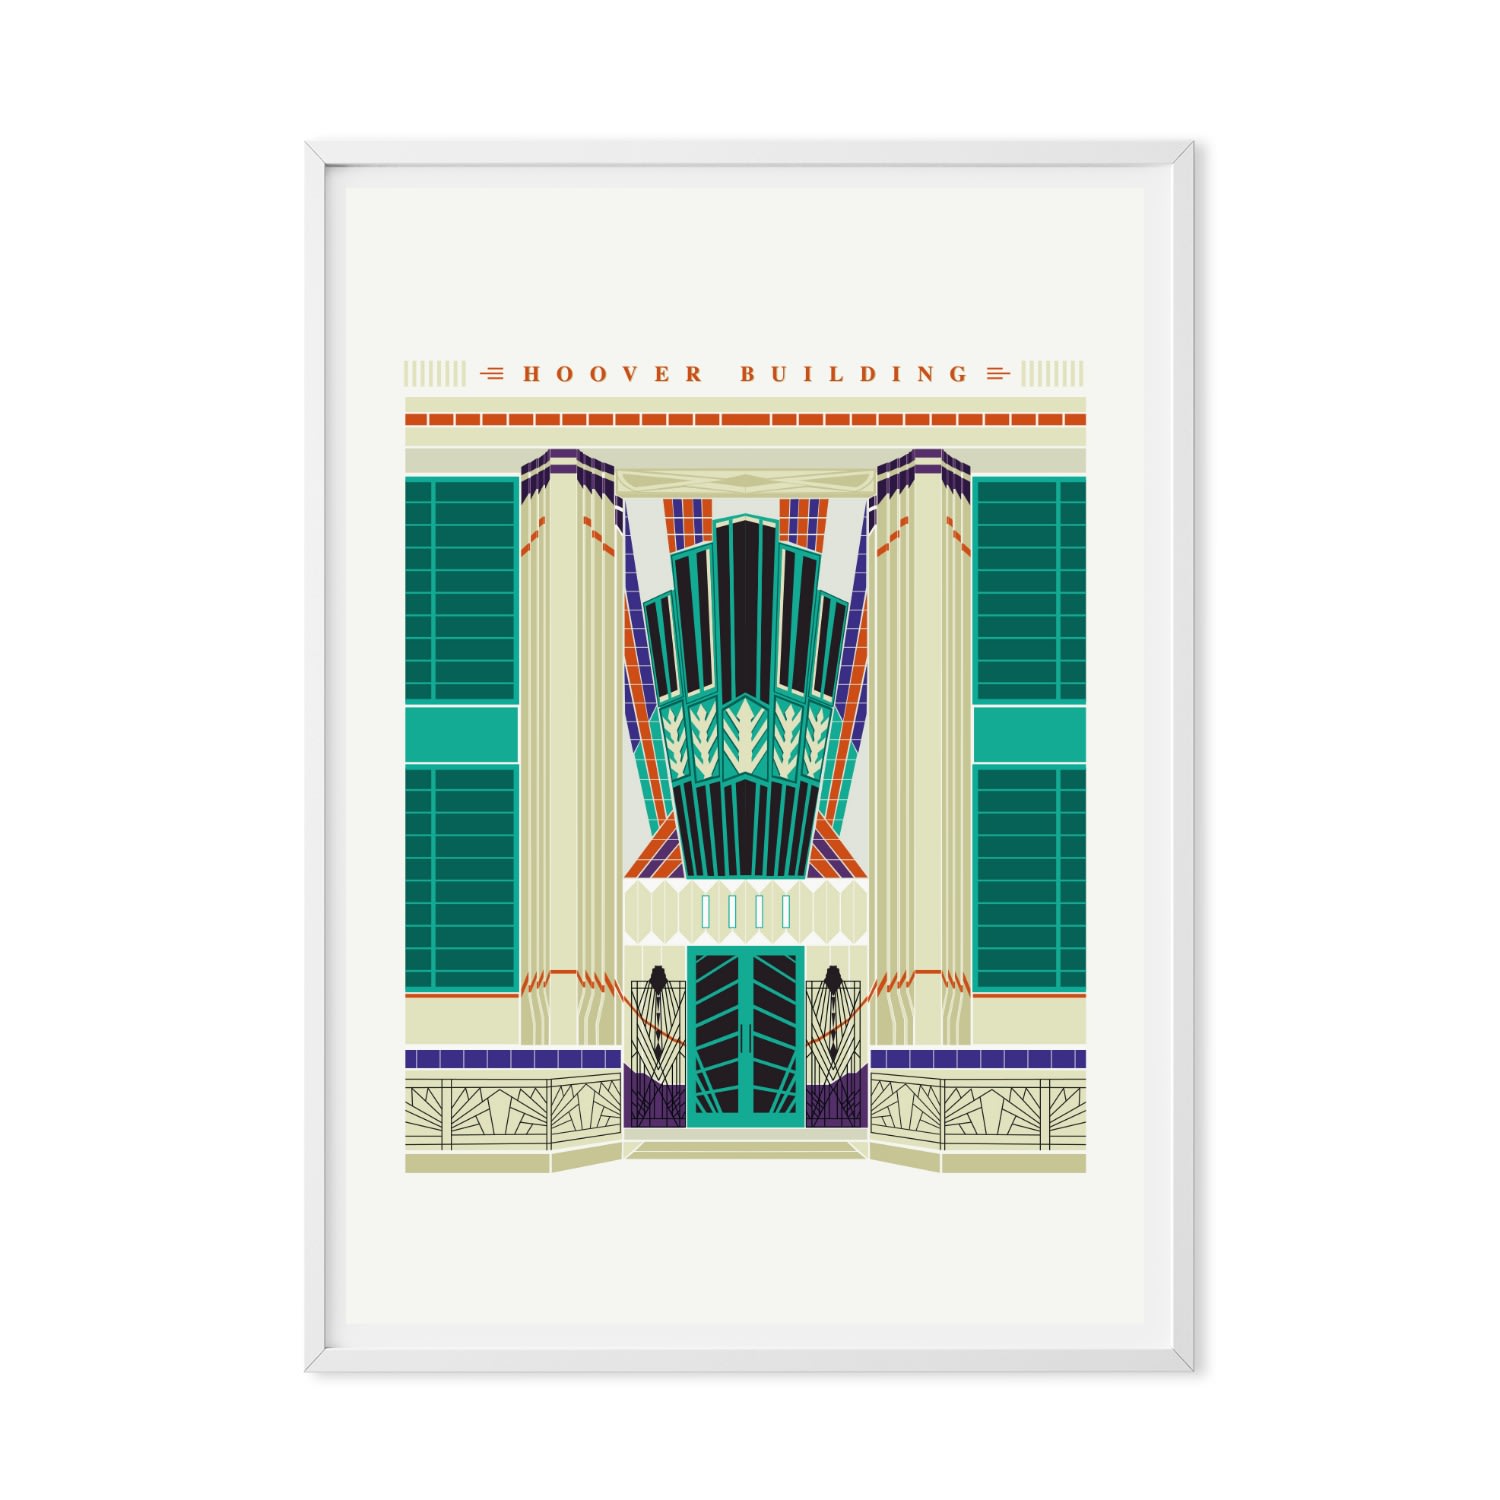 The Hoover Building Art Print Poster A3 297 X 420Mm Eye for London Prints